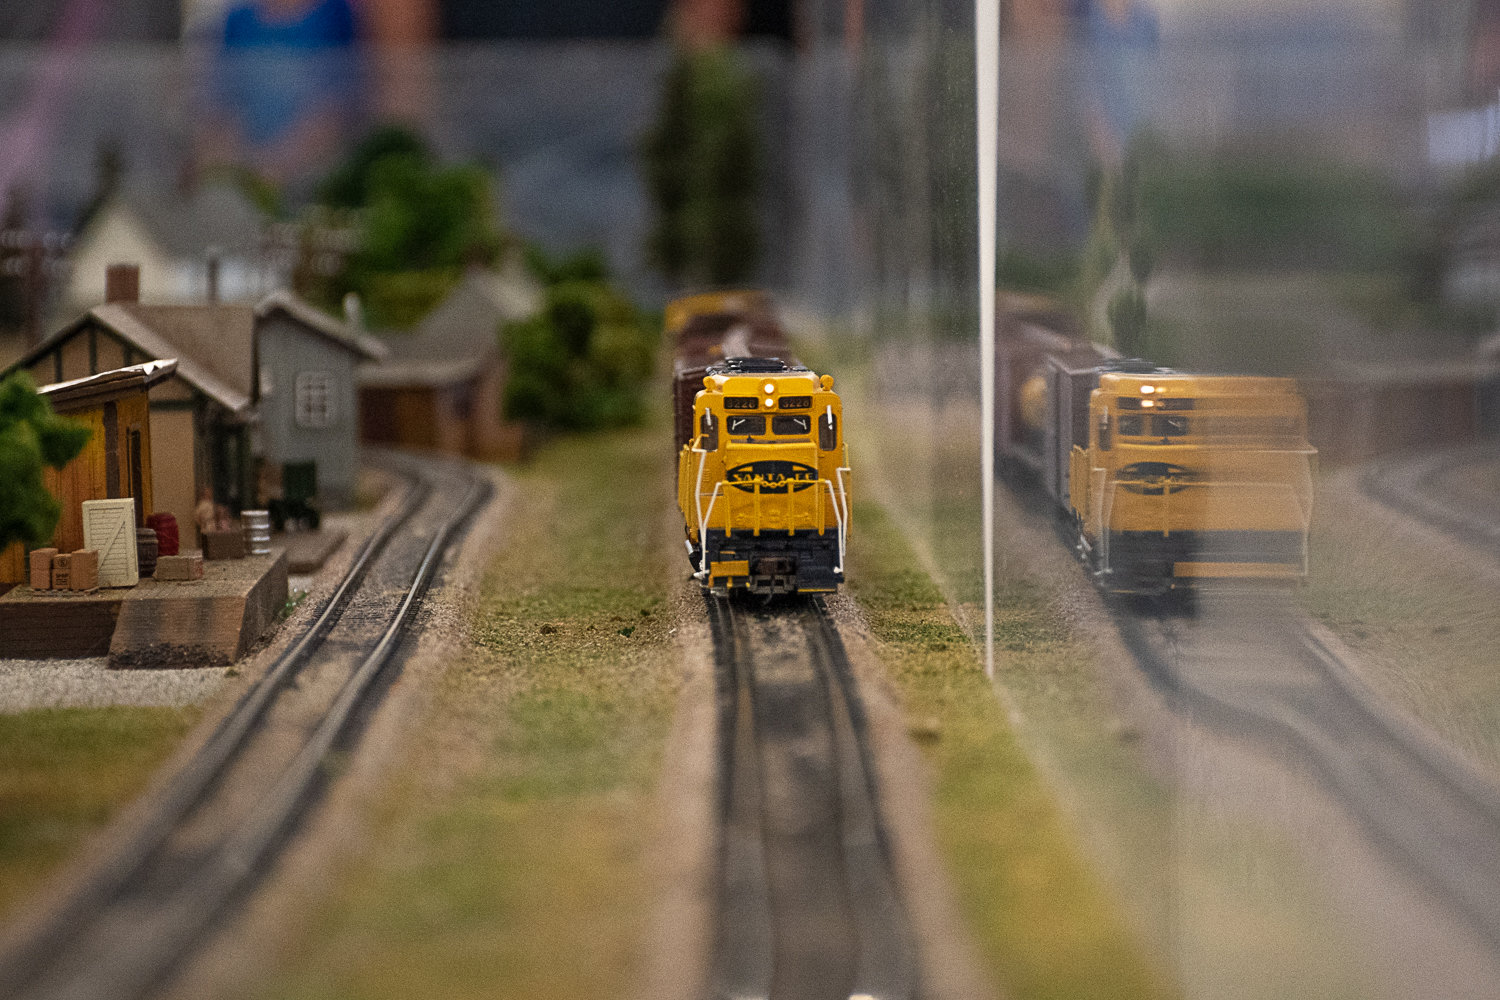 A Santa Fe locomotive pulls model freight cars down track set designed and assembled by Ted Lavremore.